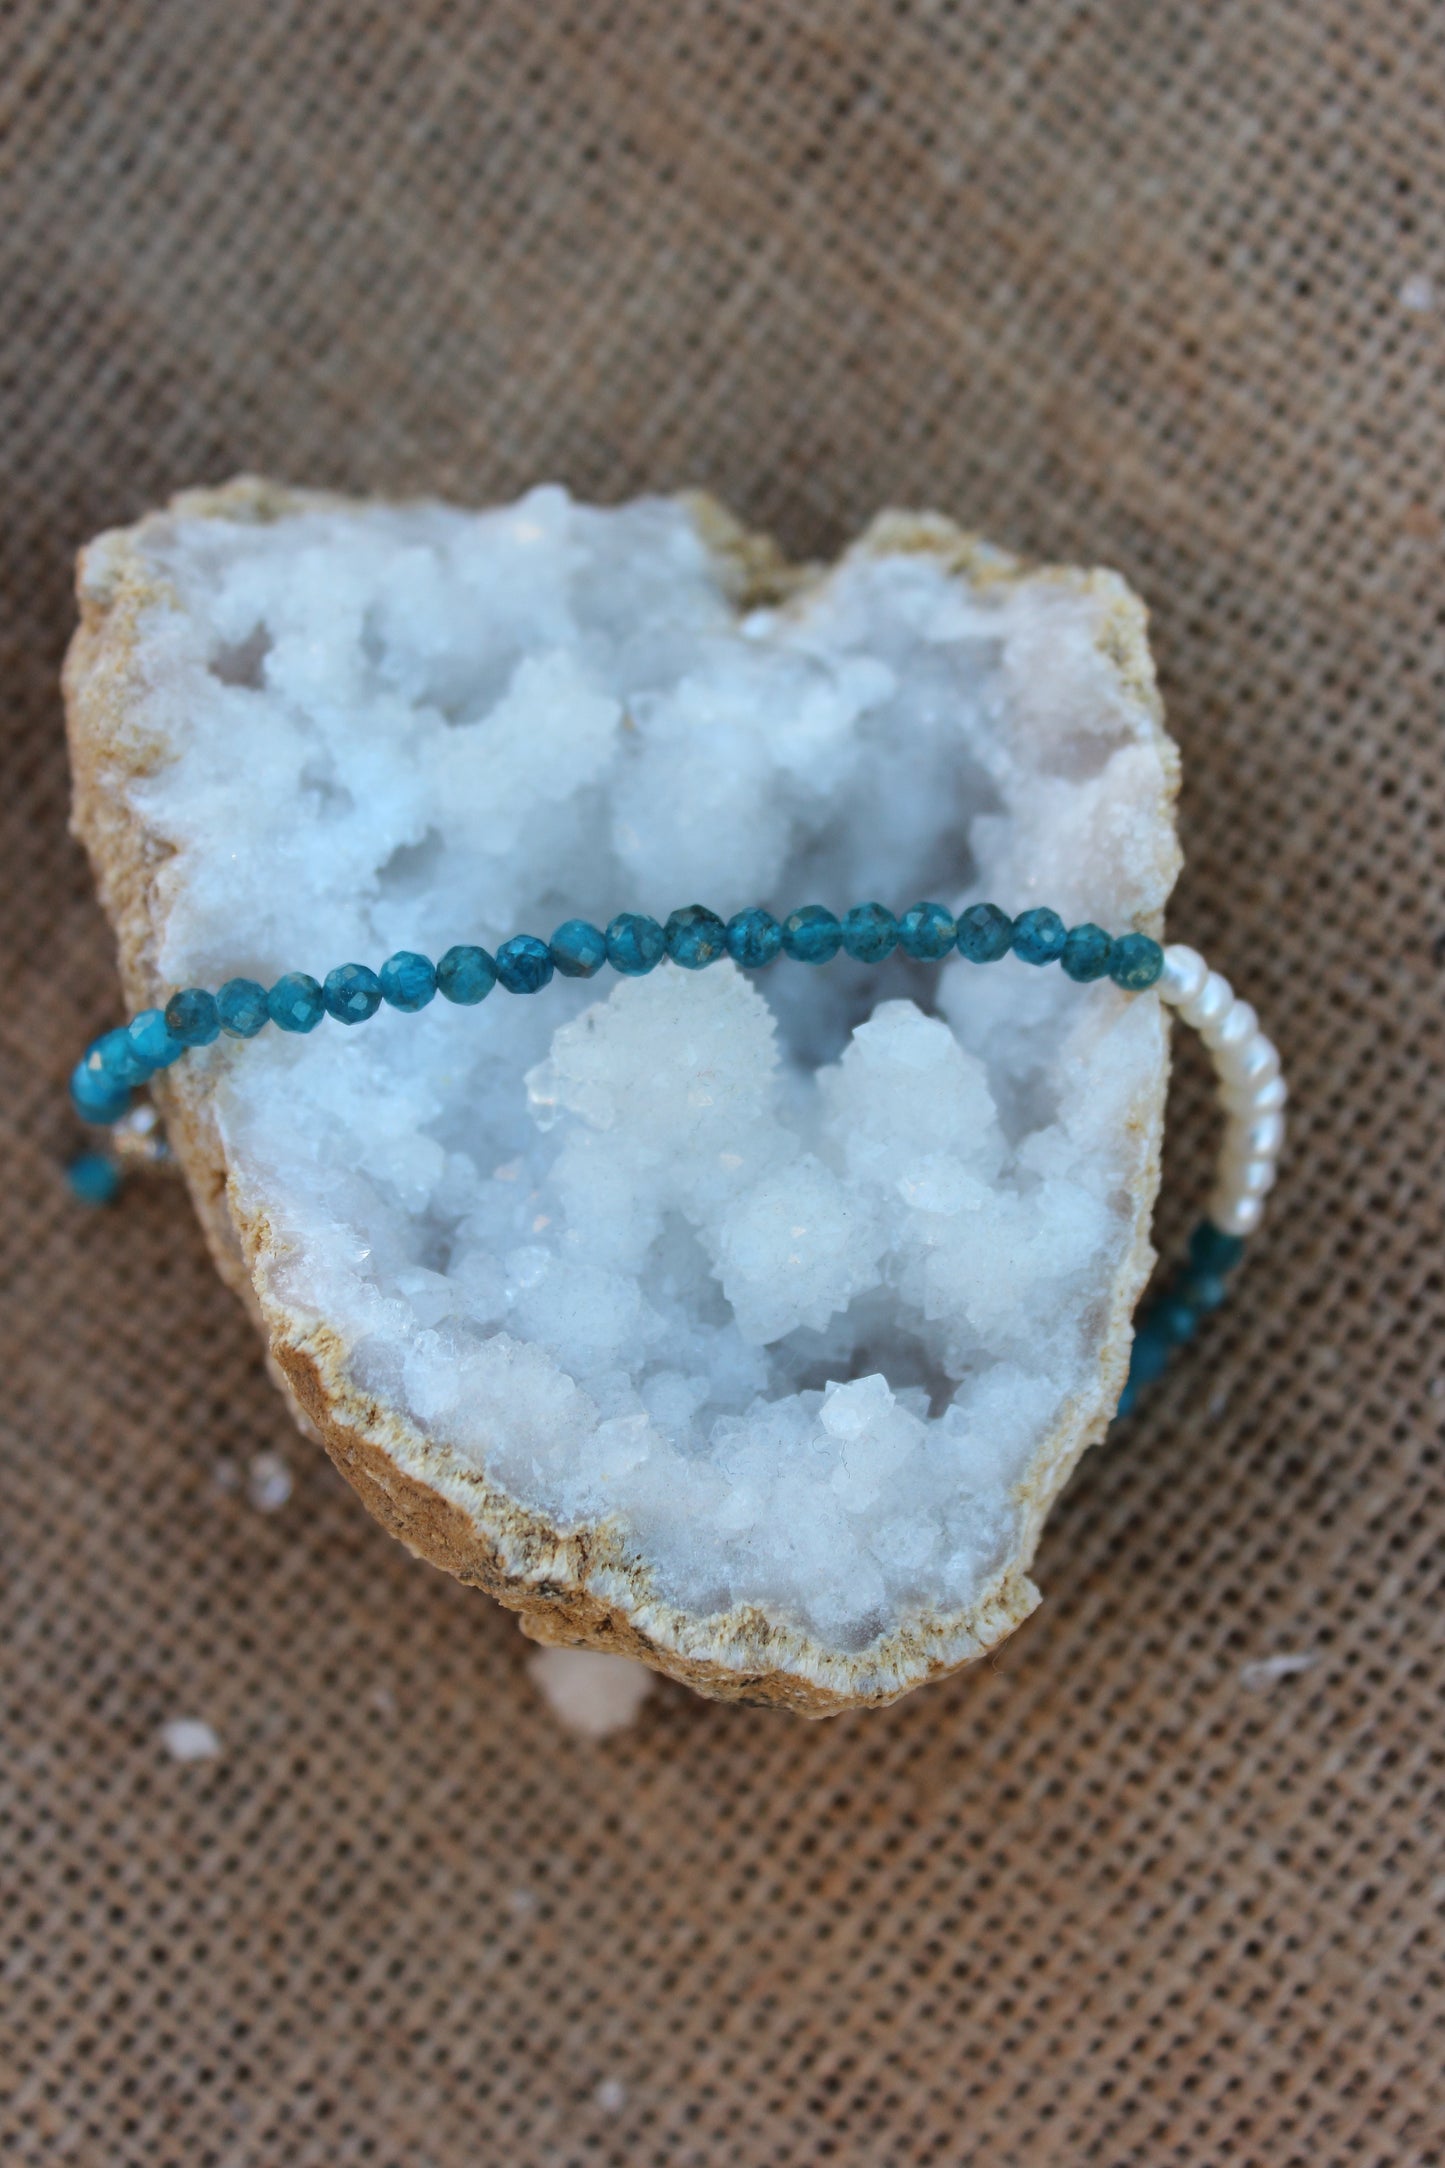 Neon Apatite and Pearl Bracelet